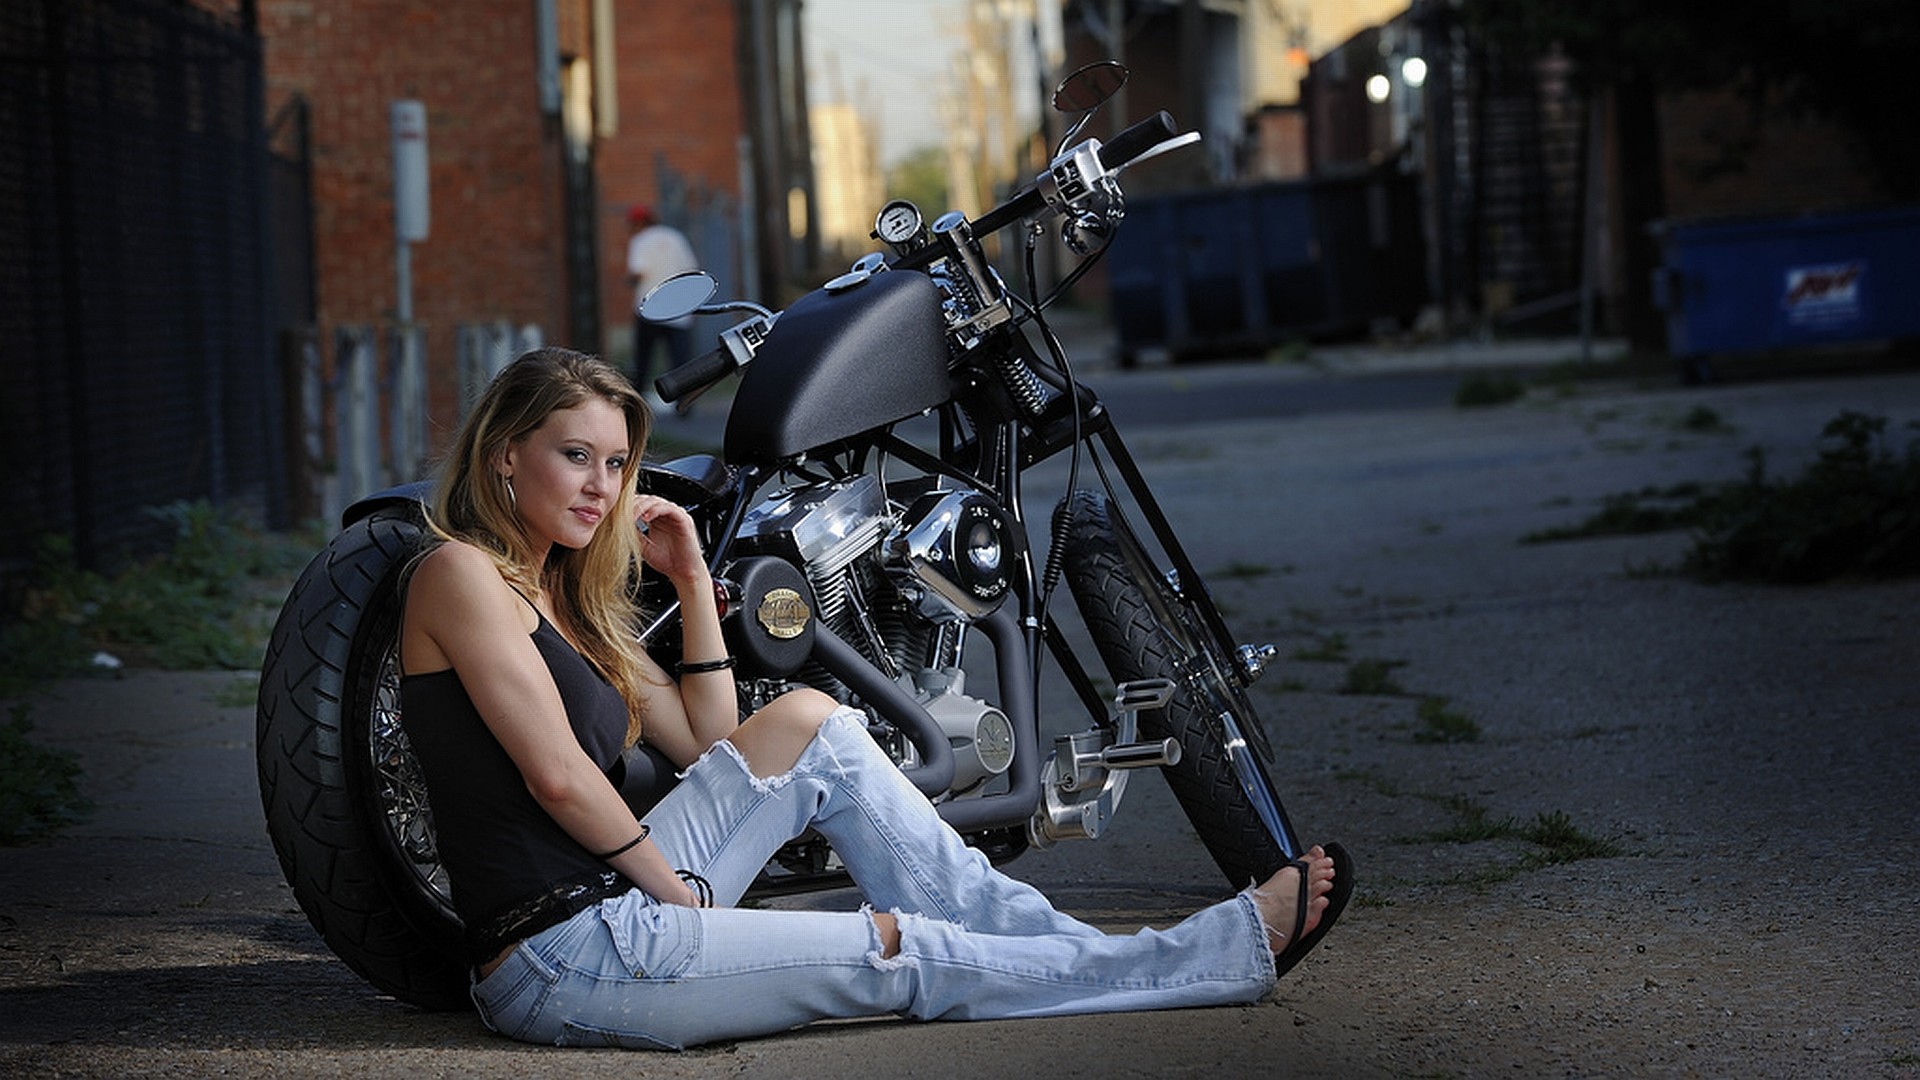 1920x1080 biker-queens: “Biker Queen ” So Far Over Real Biker Babe, Biker Event,  Motorcycle and incredible photos of Professional models posing with bikes  of all ...